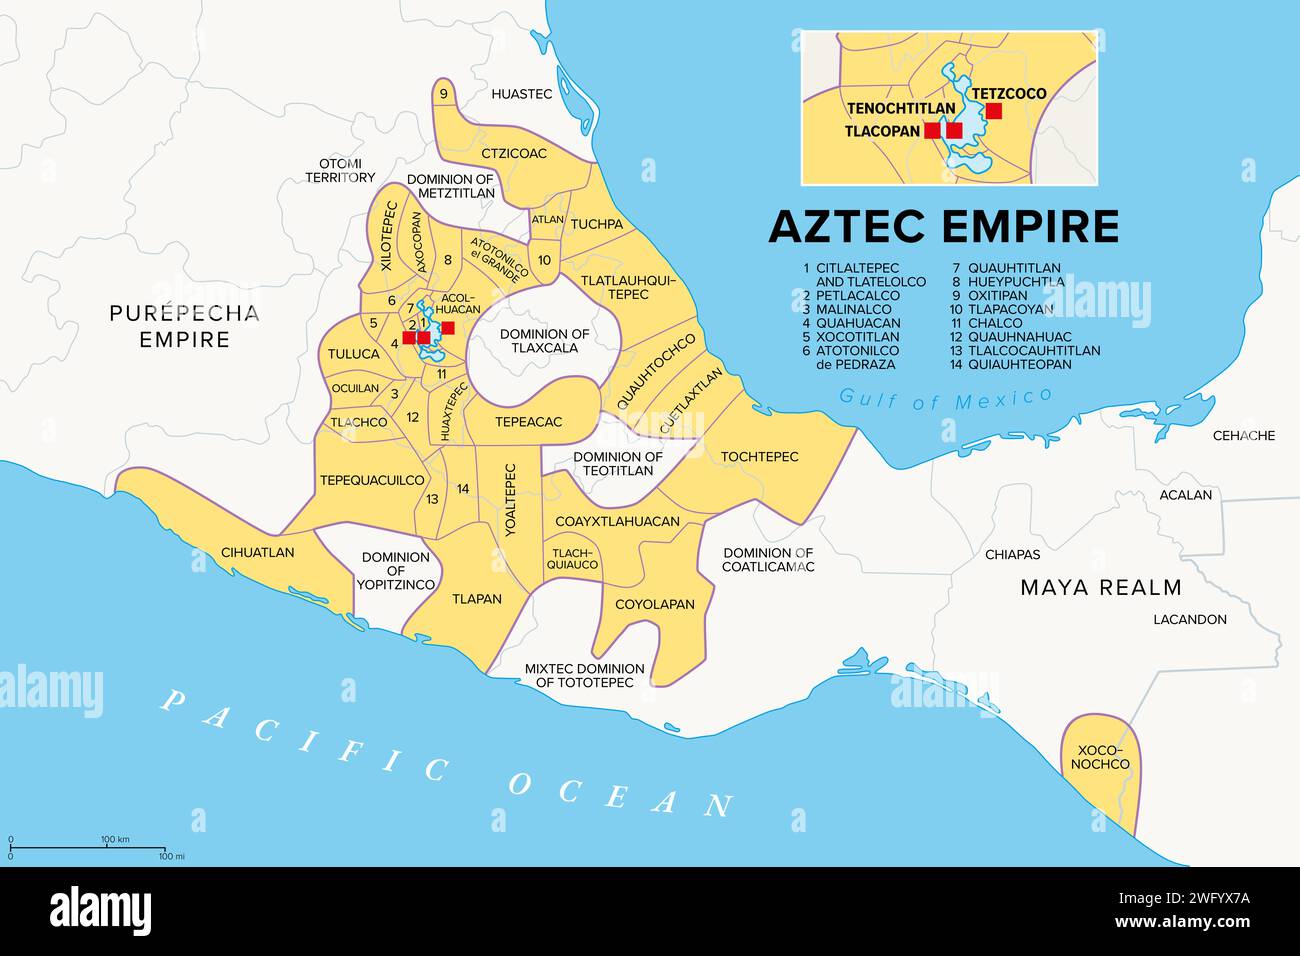 Aztec Empire with tributary provinces, history map. Maximal extent of Triple Alliance Tenochtitlan, Tetzcoco and Tlacopan at the time of Spanish conqu Stock Photo